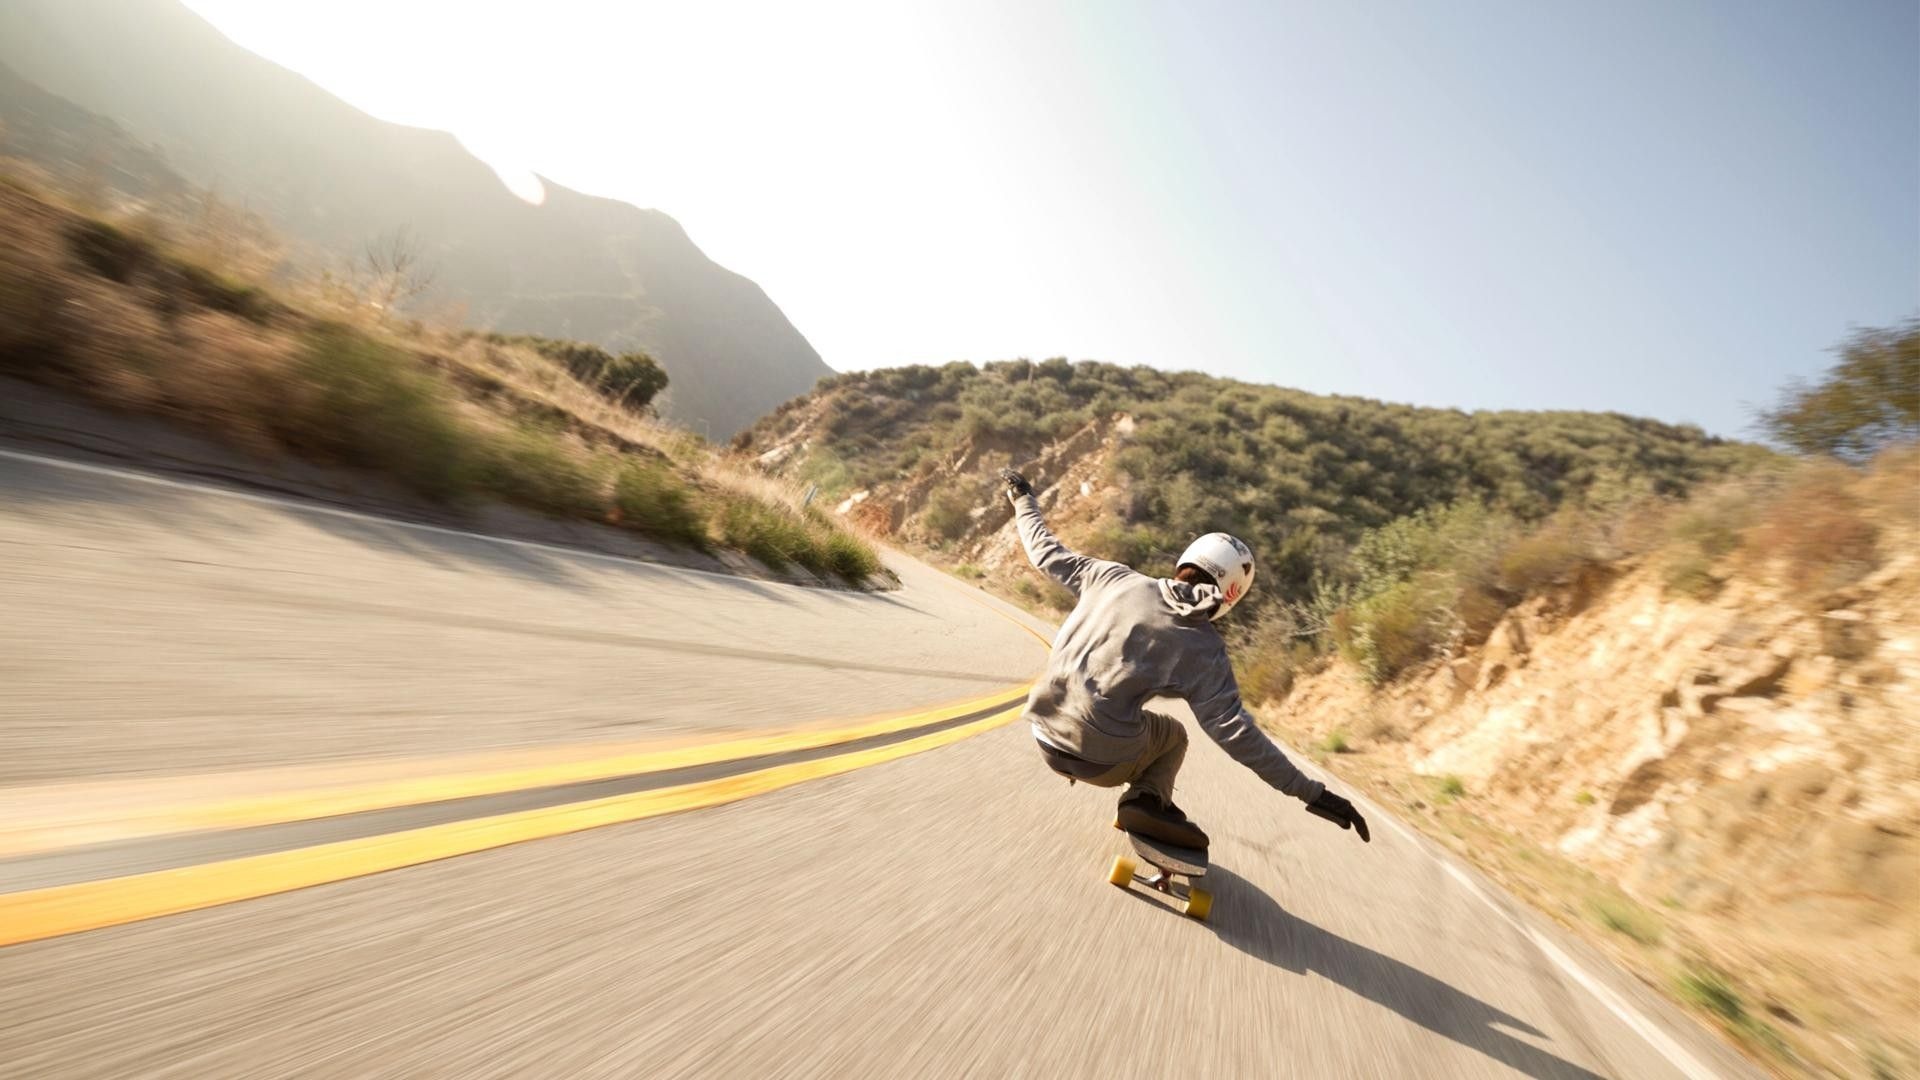 Longboarding: Downhill skateboard racing, Extreme acrobatics and tricks, Extreme sport. 1920x1080 Full HD Background.